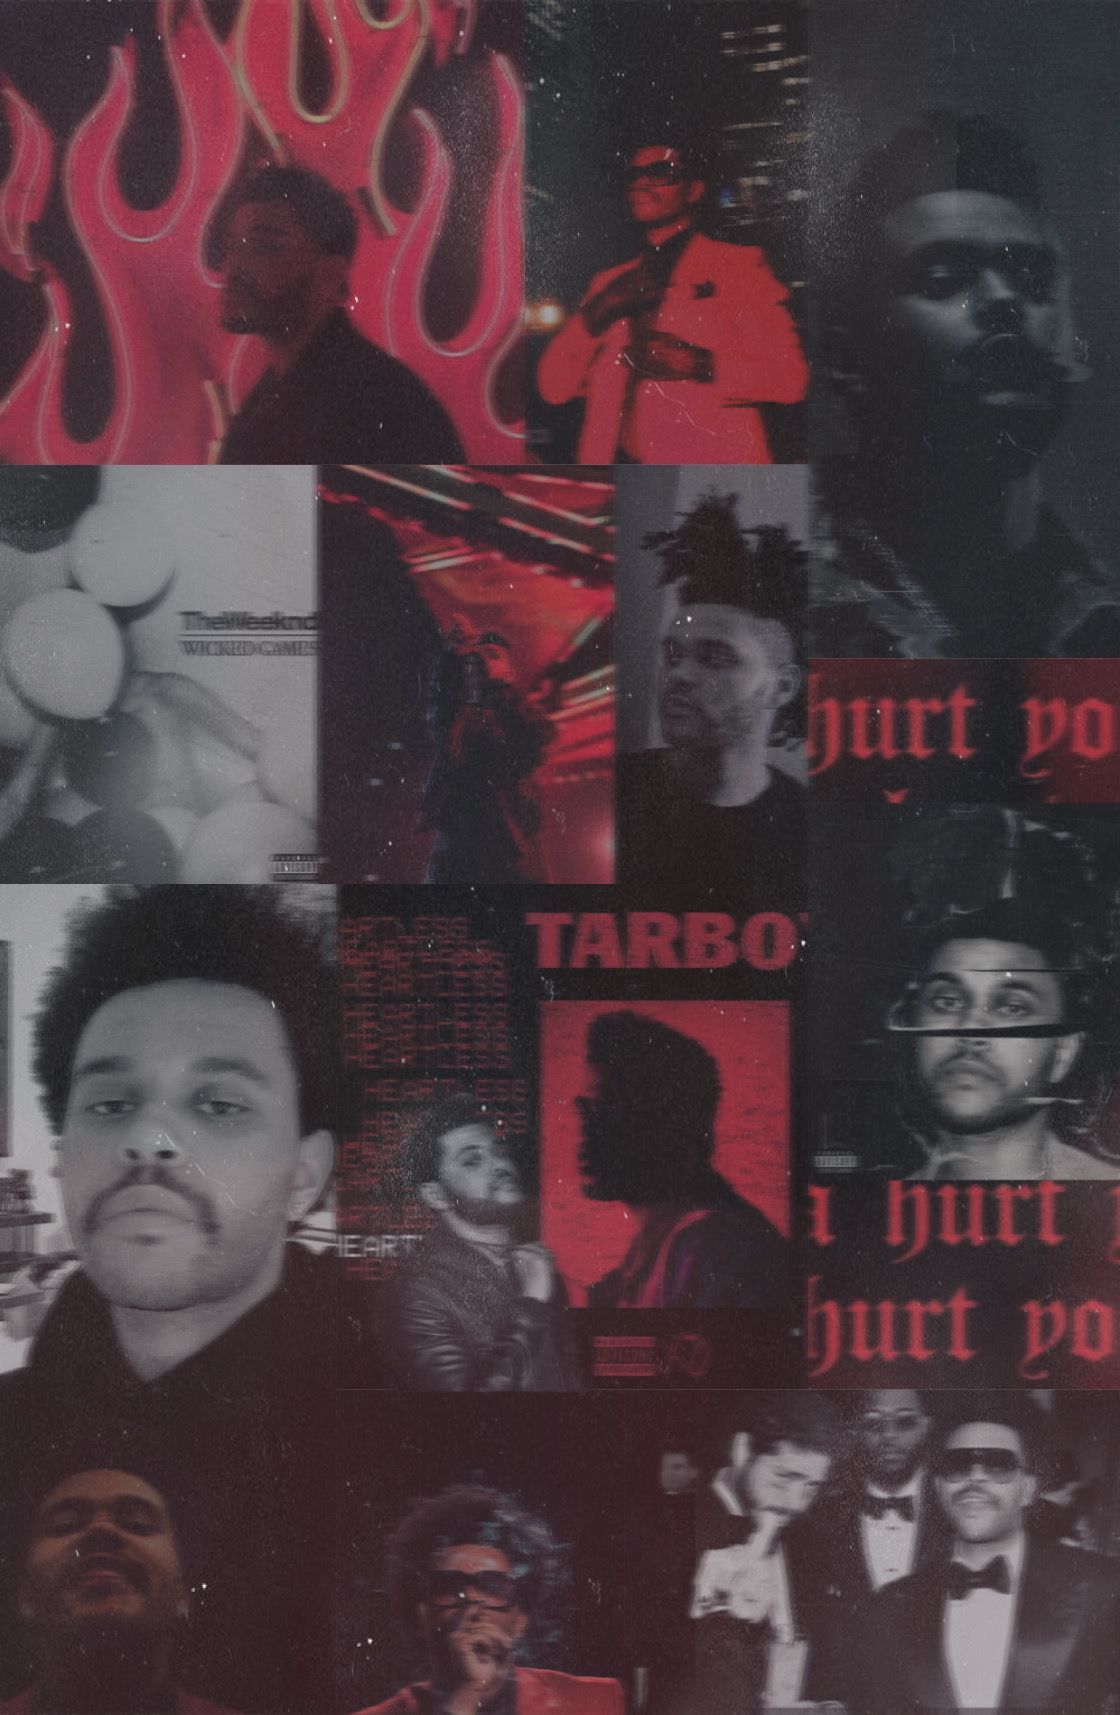 A poster with many different images of people - The Weeknd